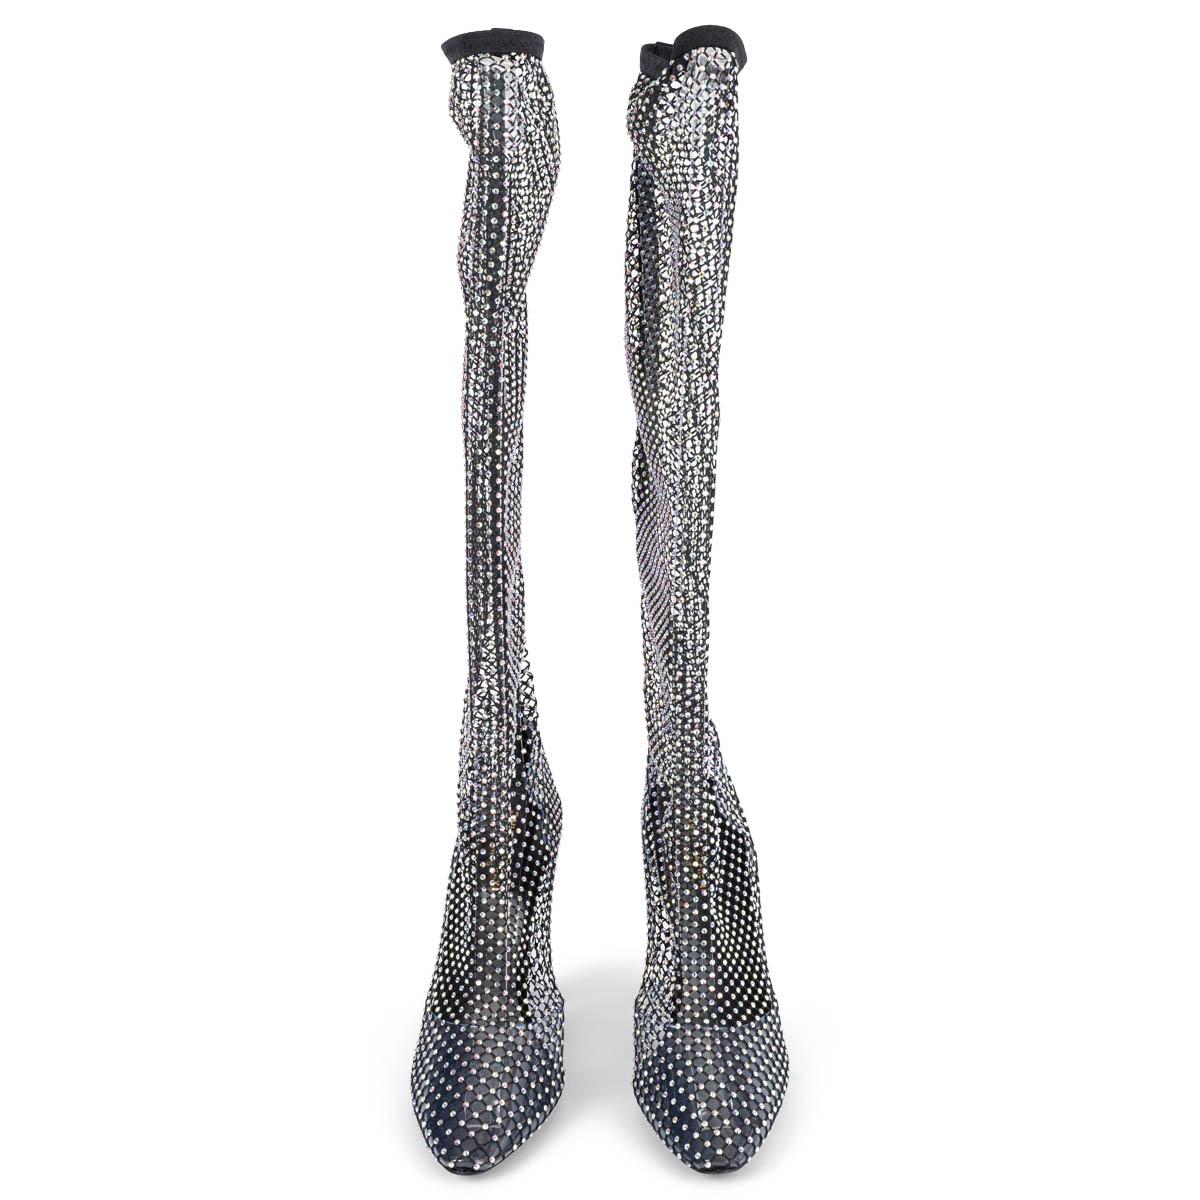 100% authentic Saint Laurent 68 knee-high boots made from Lurex® mesh with suede trims and adorned with crystal embellishments. Elastic band at top. Have been worn once and are in virtually new condition. Come with dust bags.